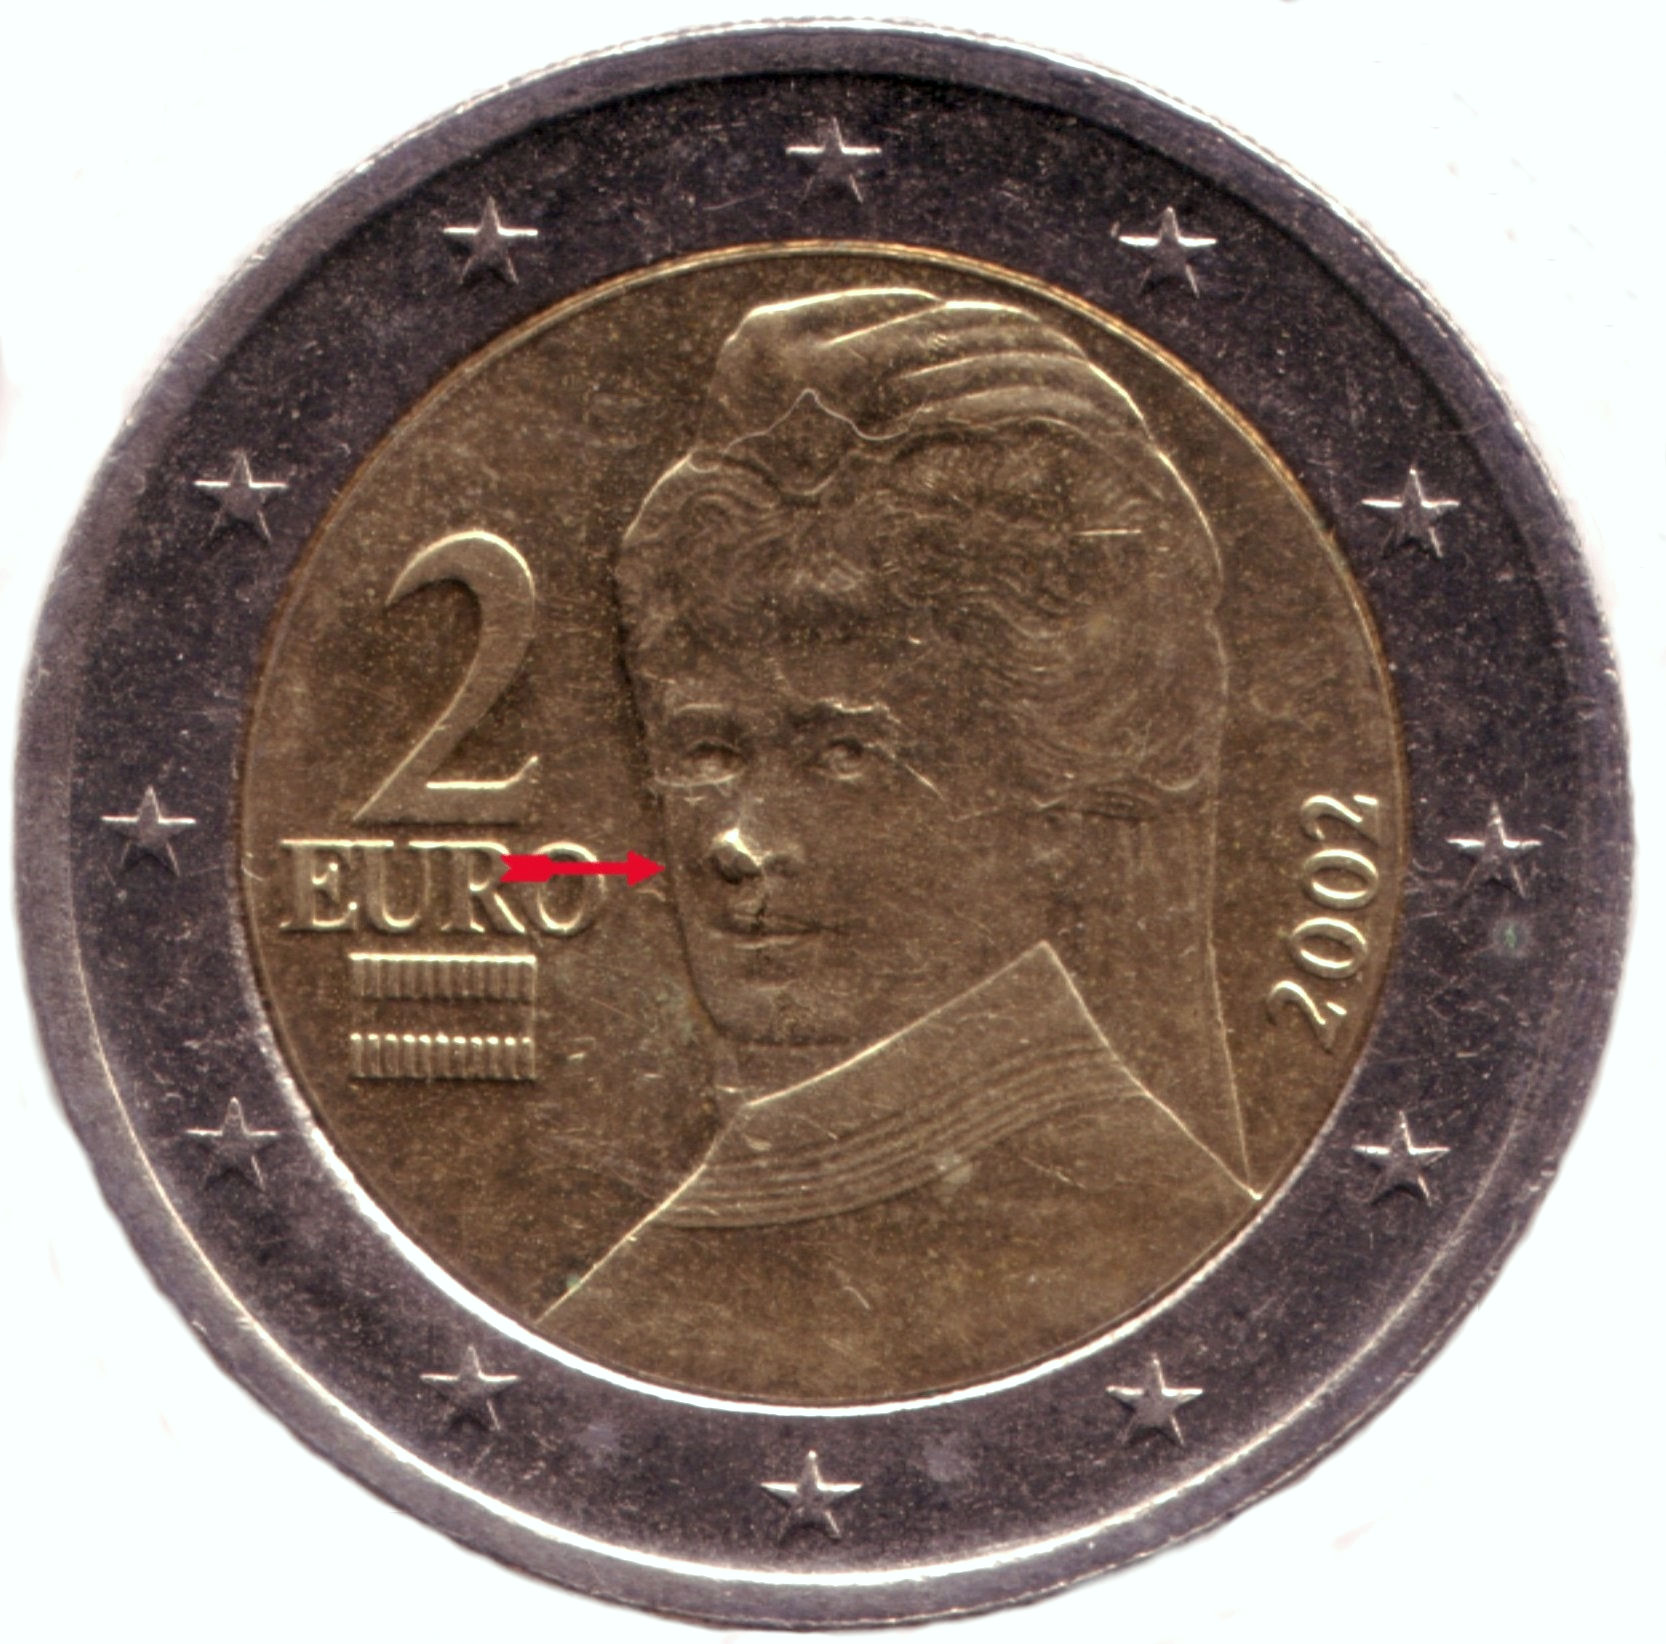 2-euro error coin from Austria from example 3. Photo: Angela Graff